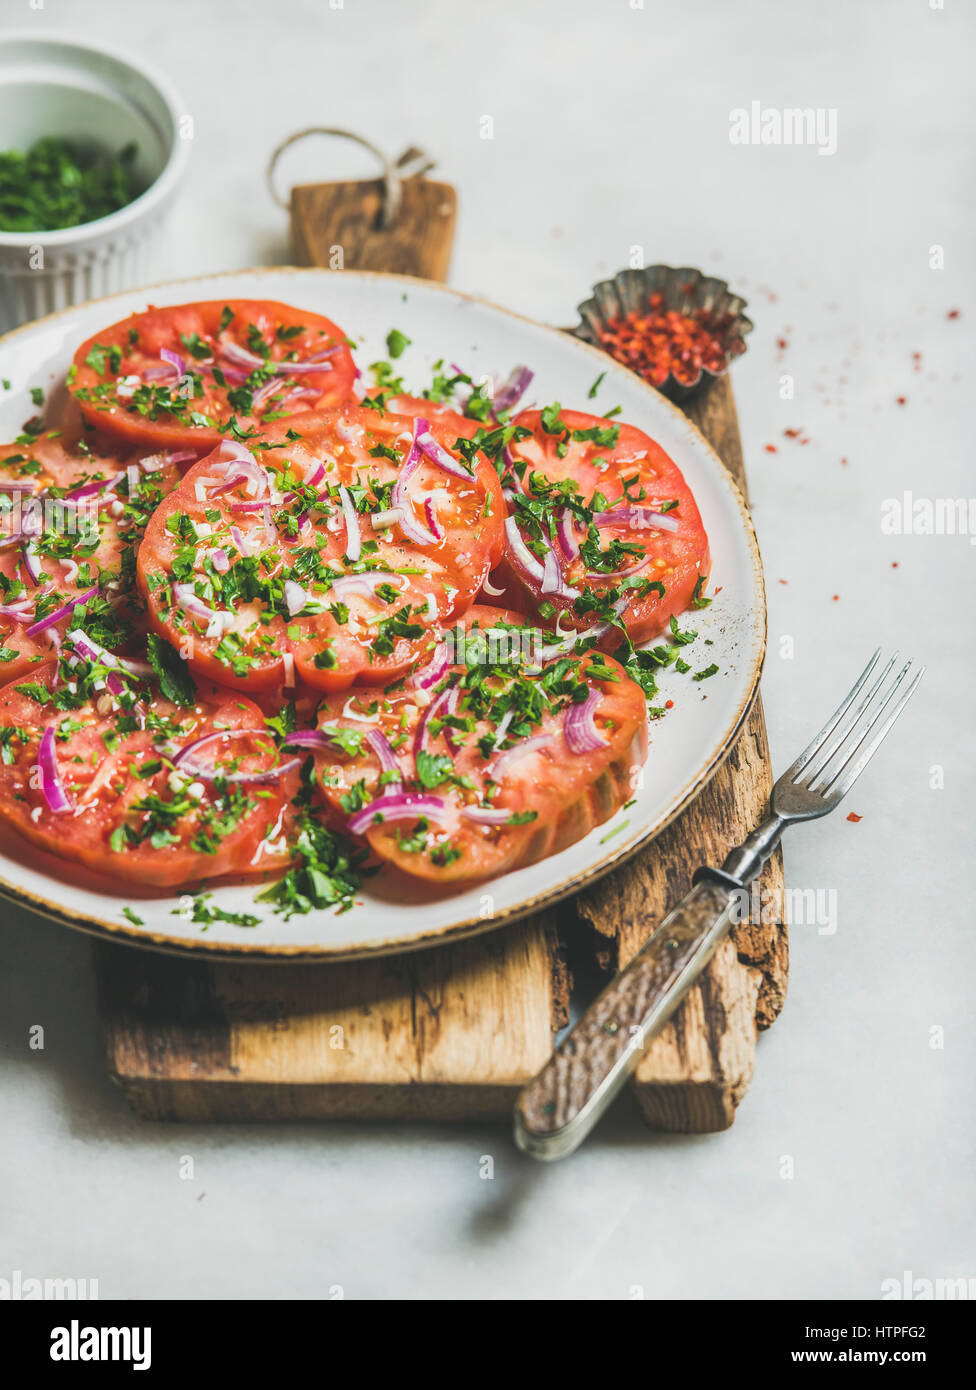 Fresh heirloom tomato, parsley and onion salad in white plate on wooden board over light grey marble background, selective focus. Clean eating, vegan, Stock Photo